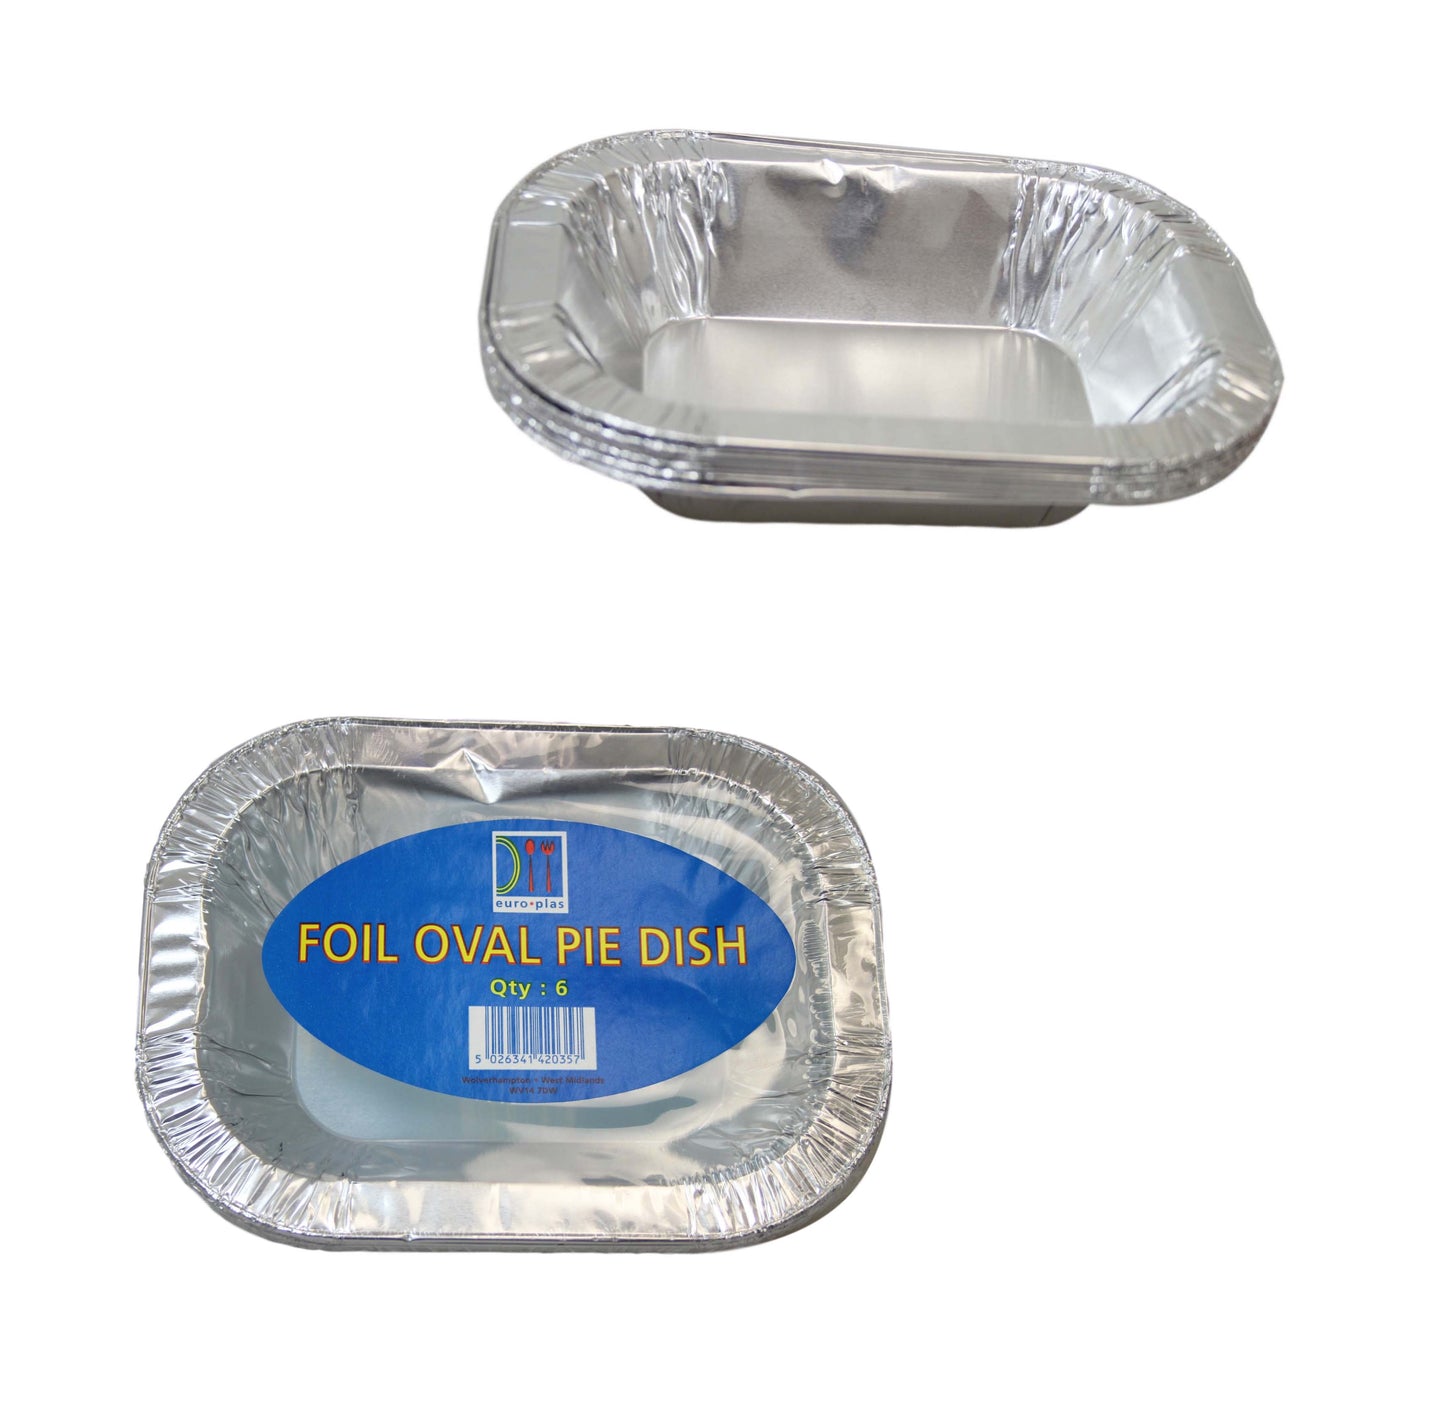 Oval Foil Pie Dish Takeaway Serving Foil Dishes Ideal For Food And Dessert 19.5cm x 5.2cm 6 Pack 0357 (Parcel Rate)